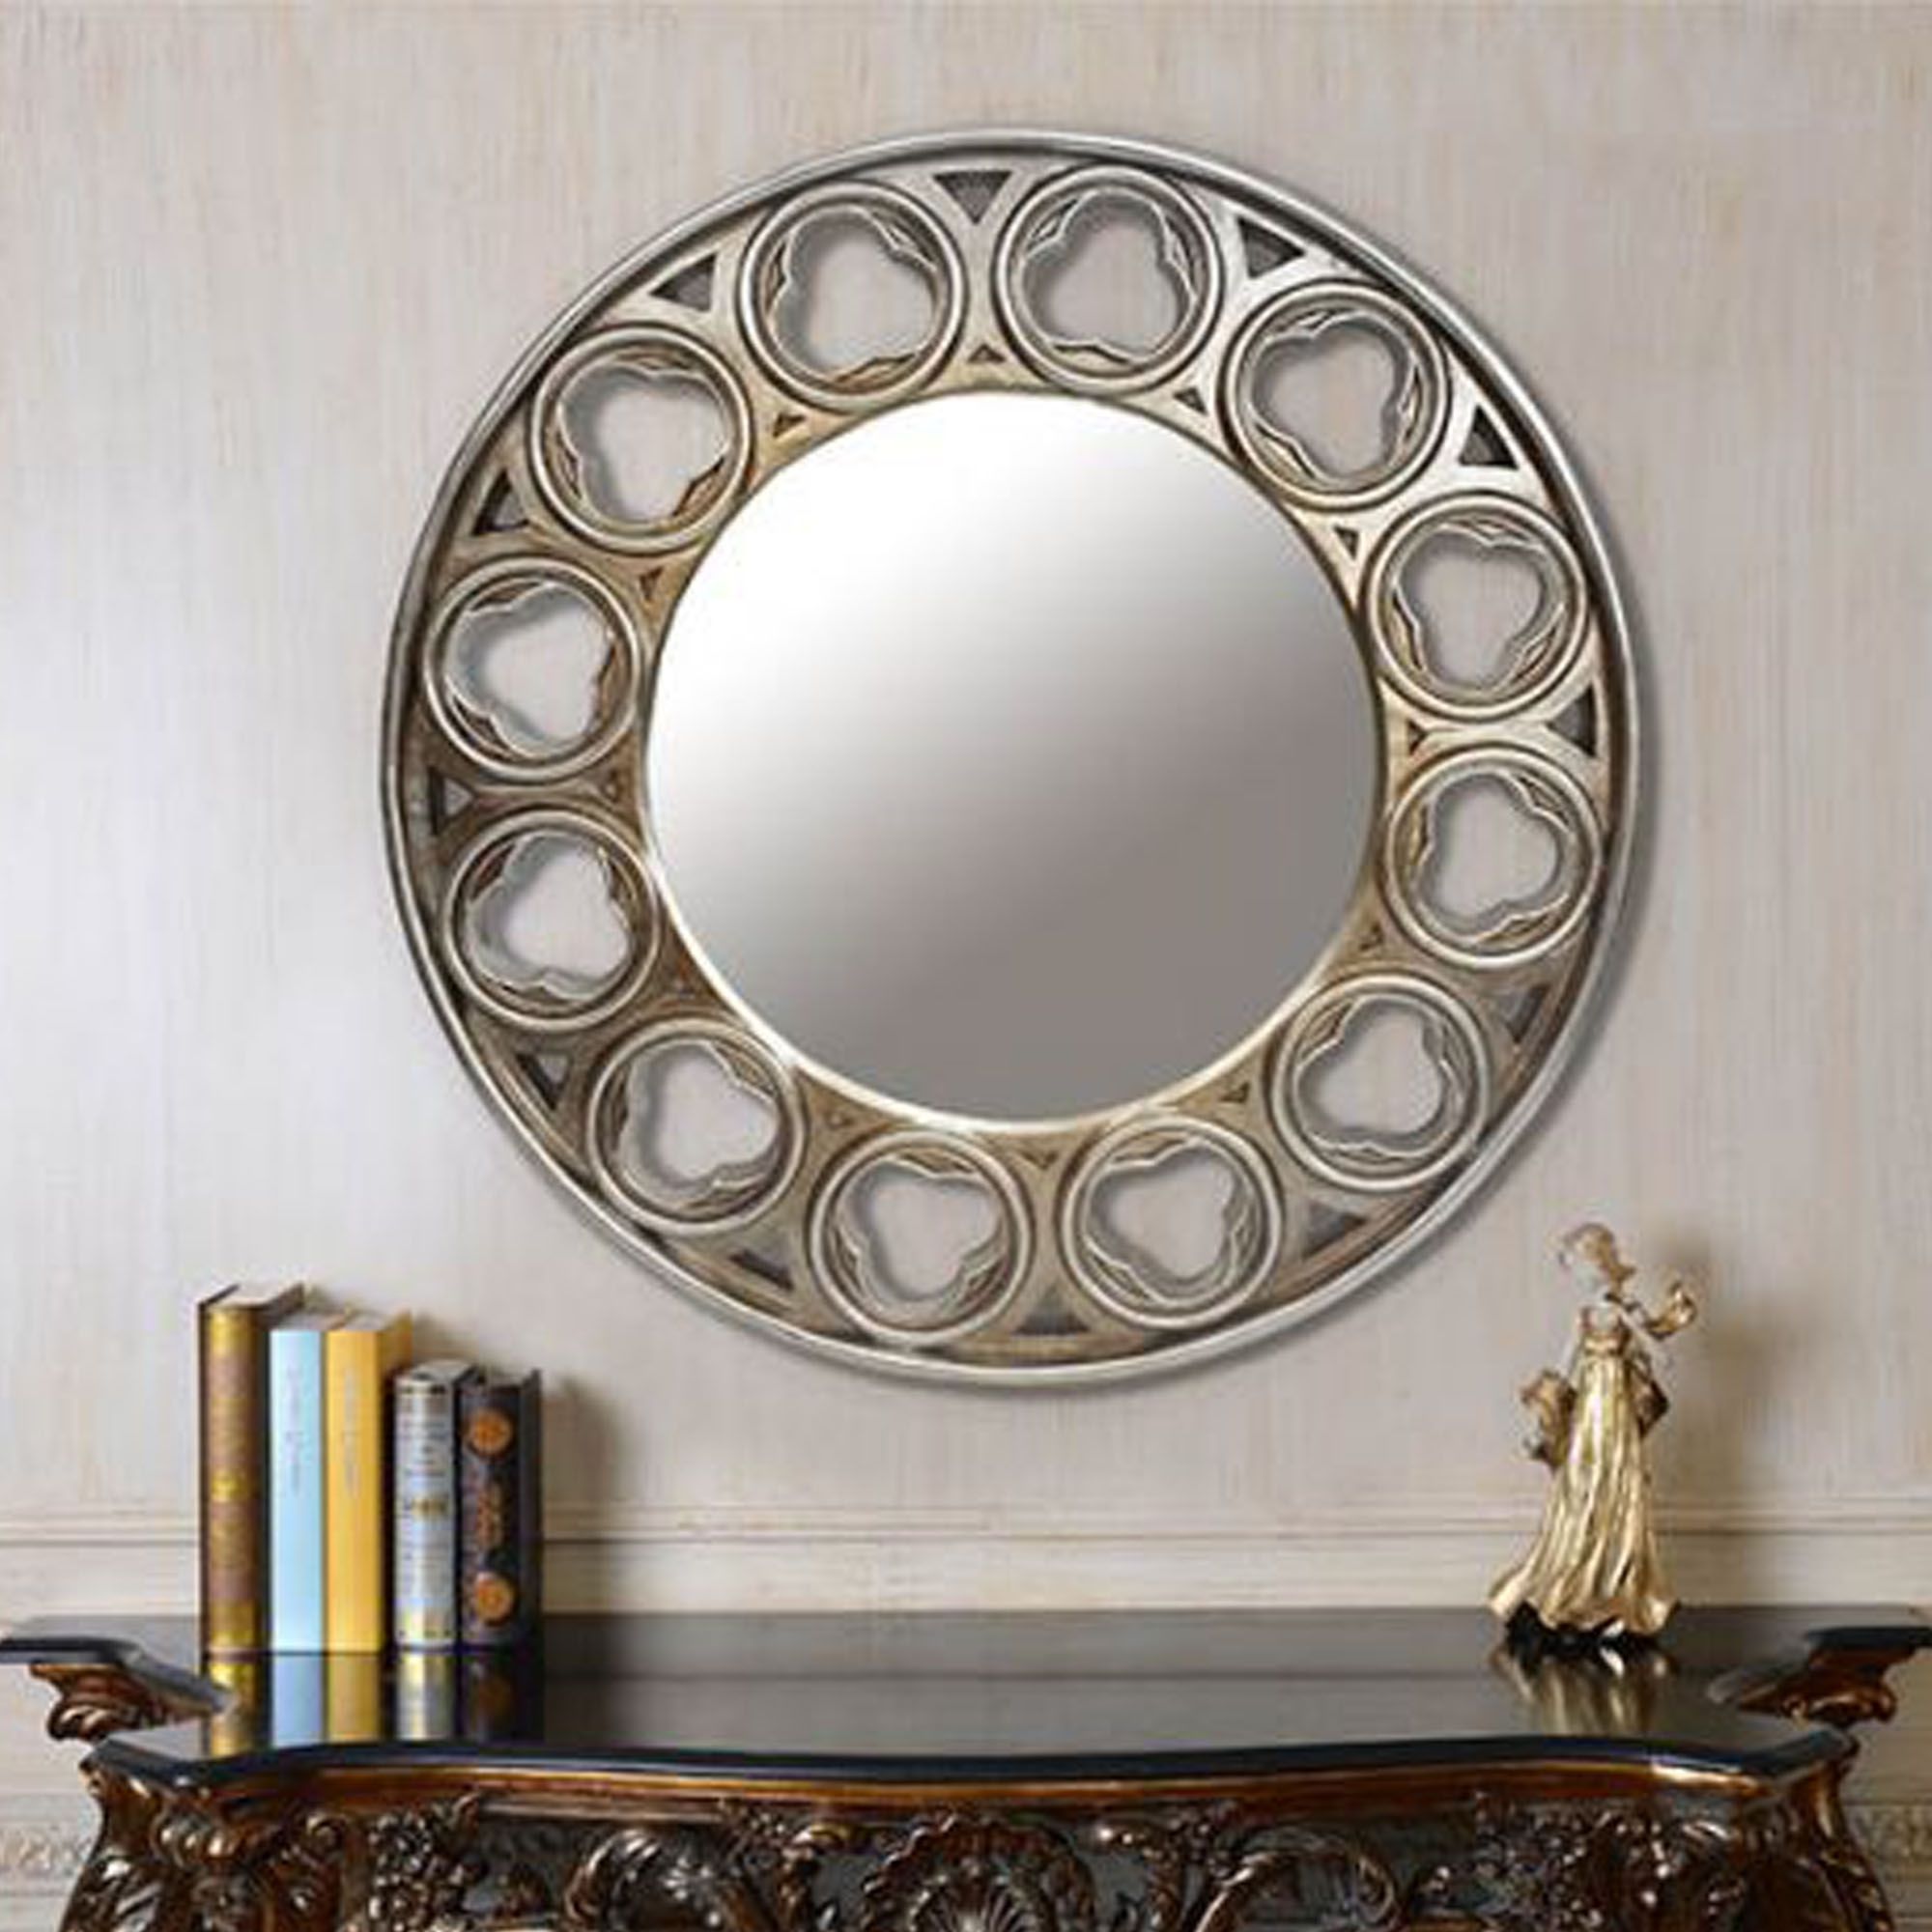 2020 Scalloped Round Wall Mirrors Intended For Celtic Round Mirror  Silver (View 3 of 15)